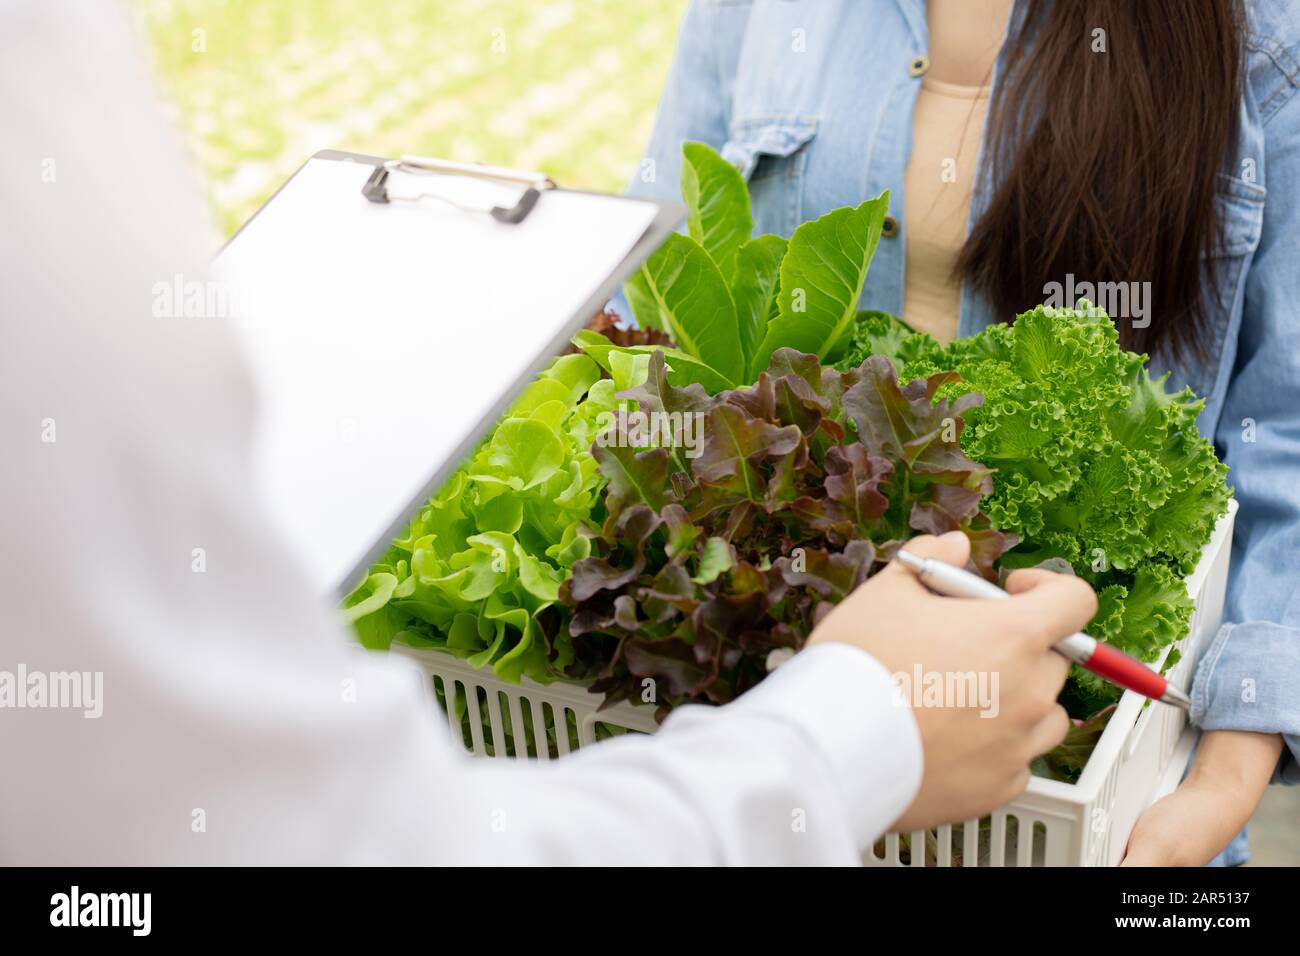 Strict inspection of organic vegetables after harvest for export to the market. Women carrying a vegetable basket to check the quality of vegetables f Stock Photo